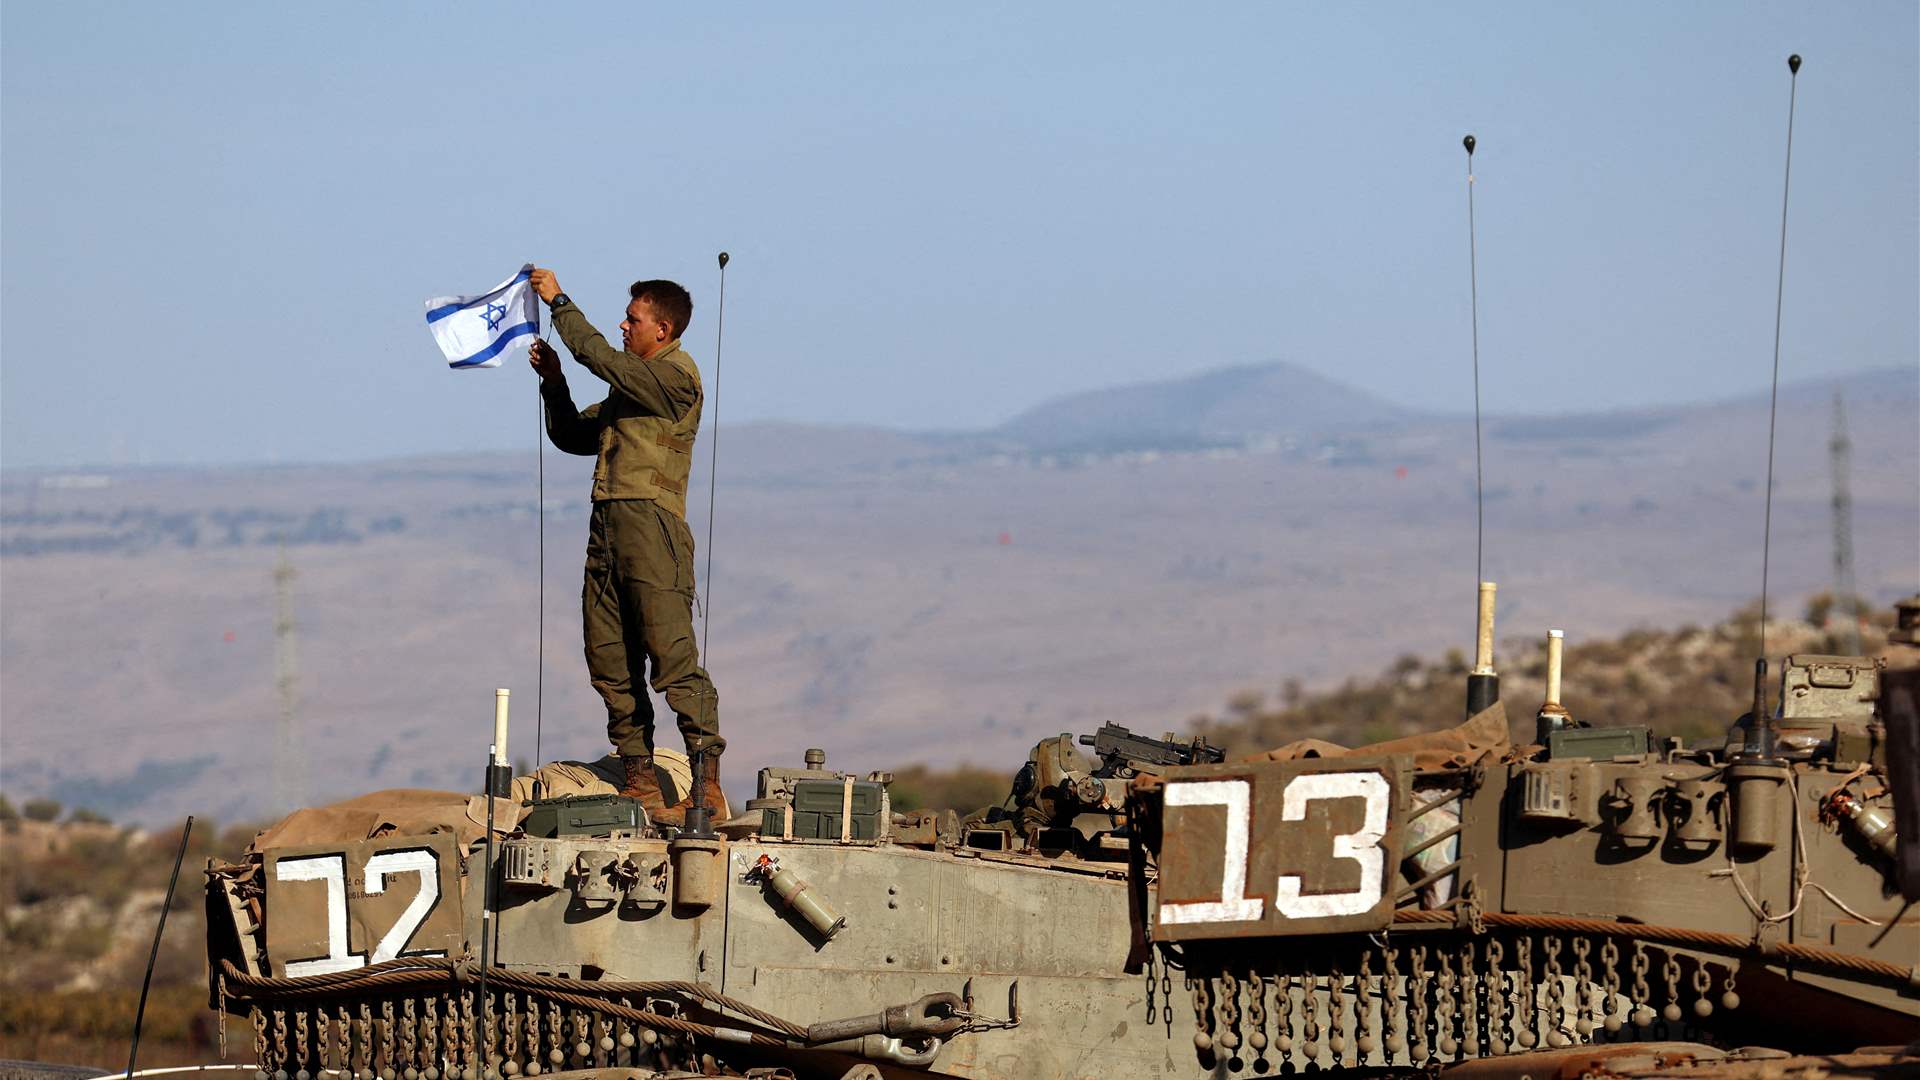 New threats: Anticipation of multi-front attack heightens fear in Israel amid military shortages